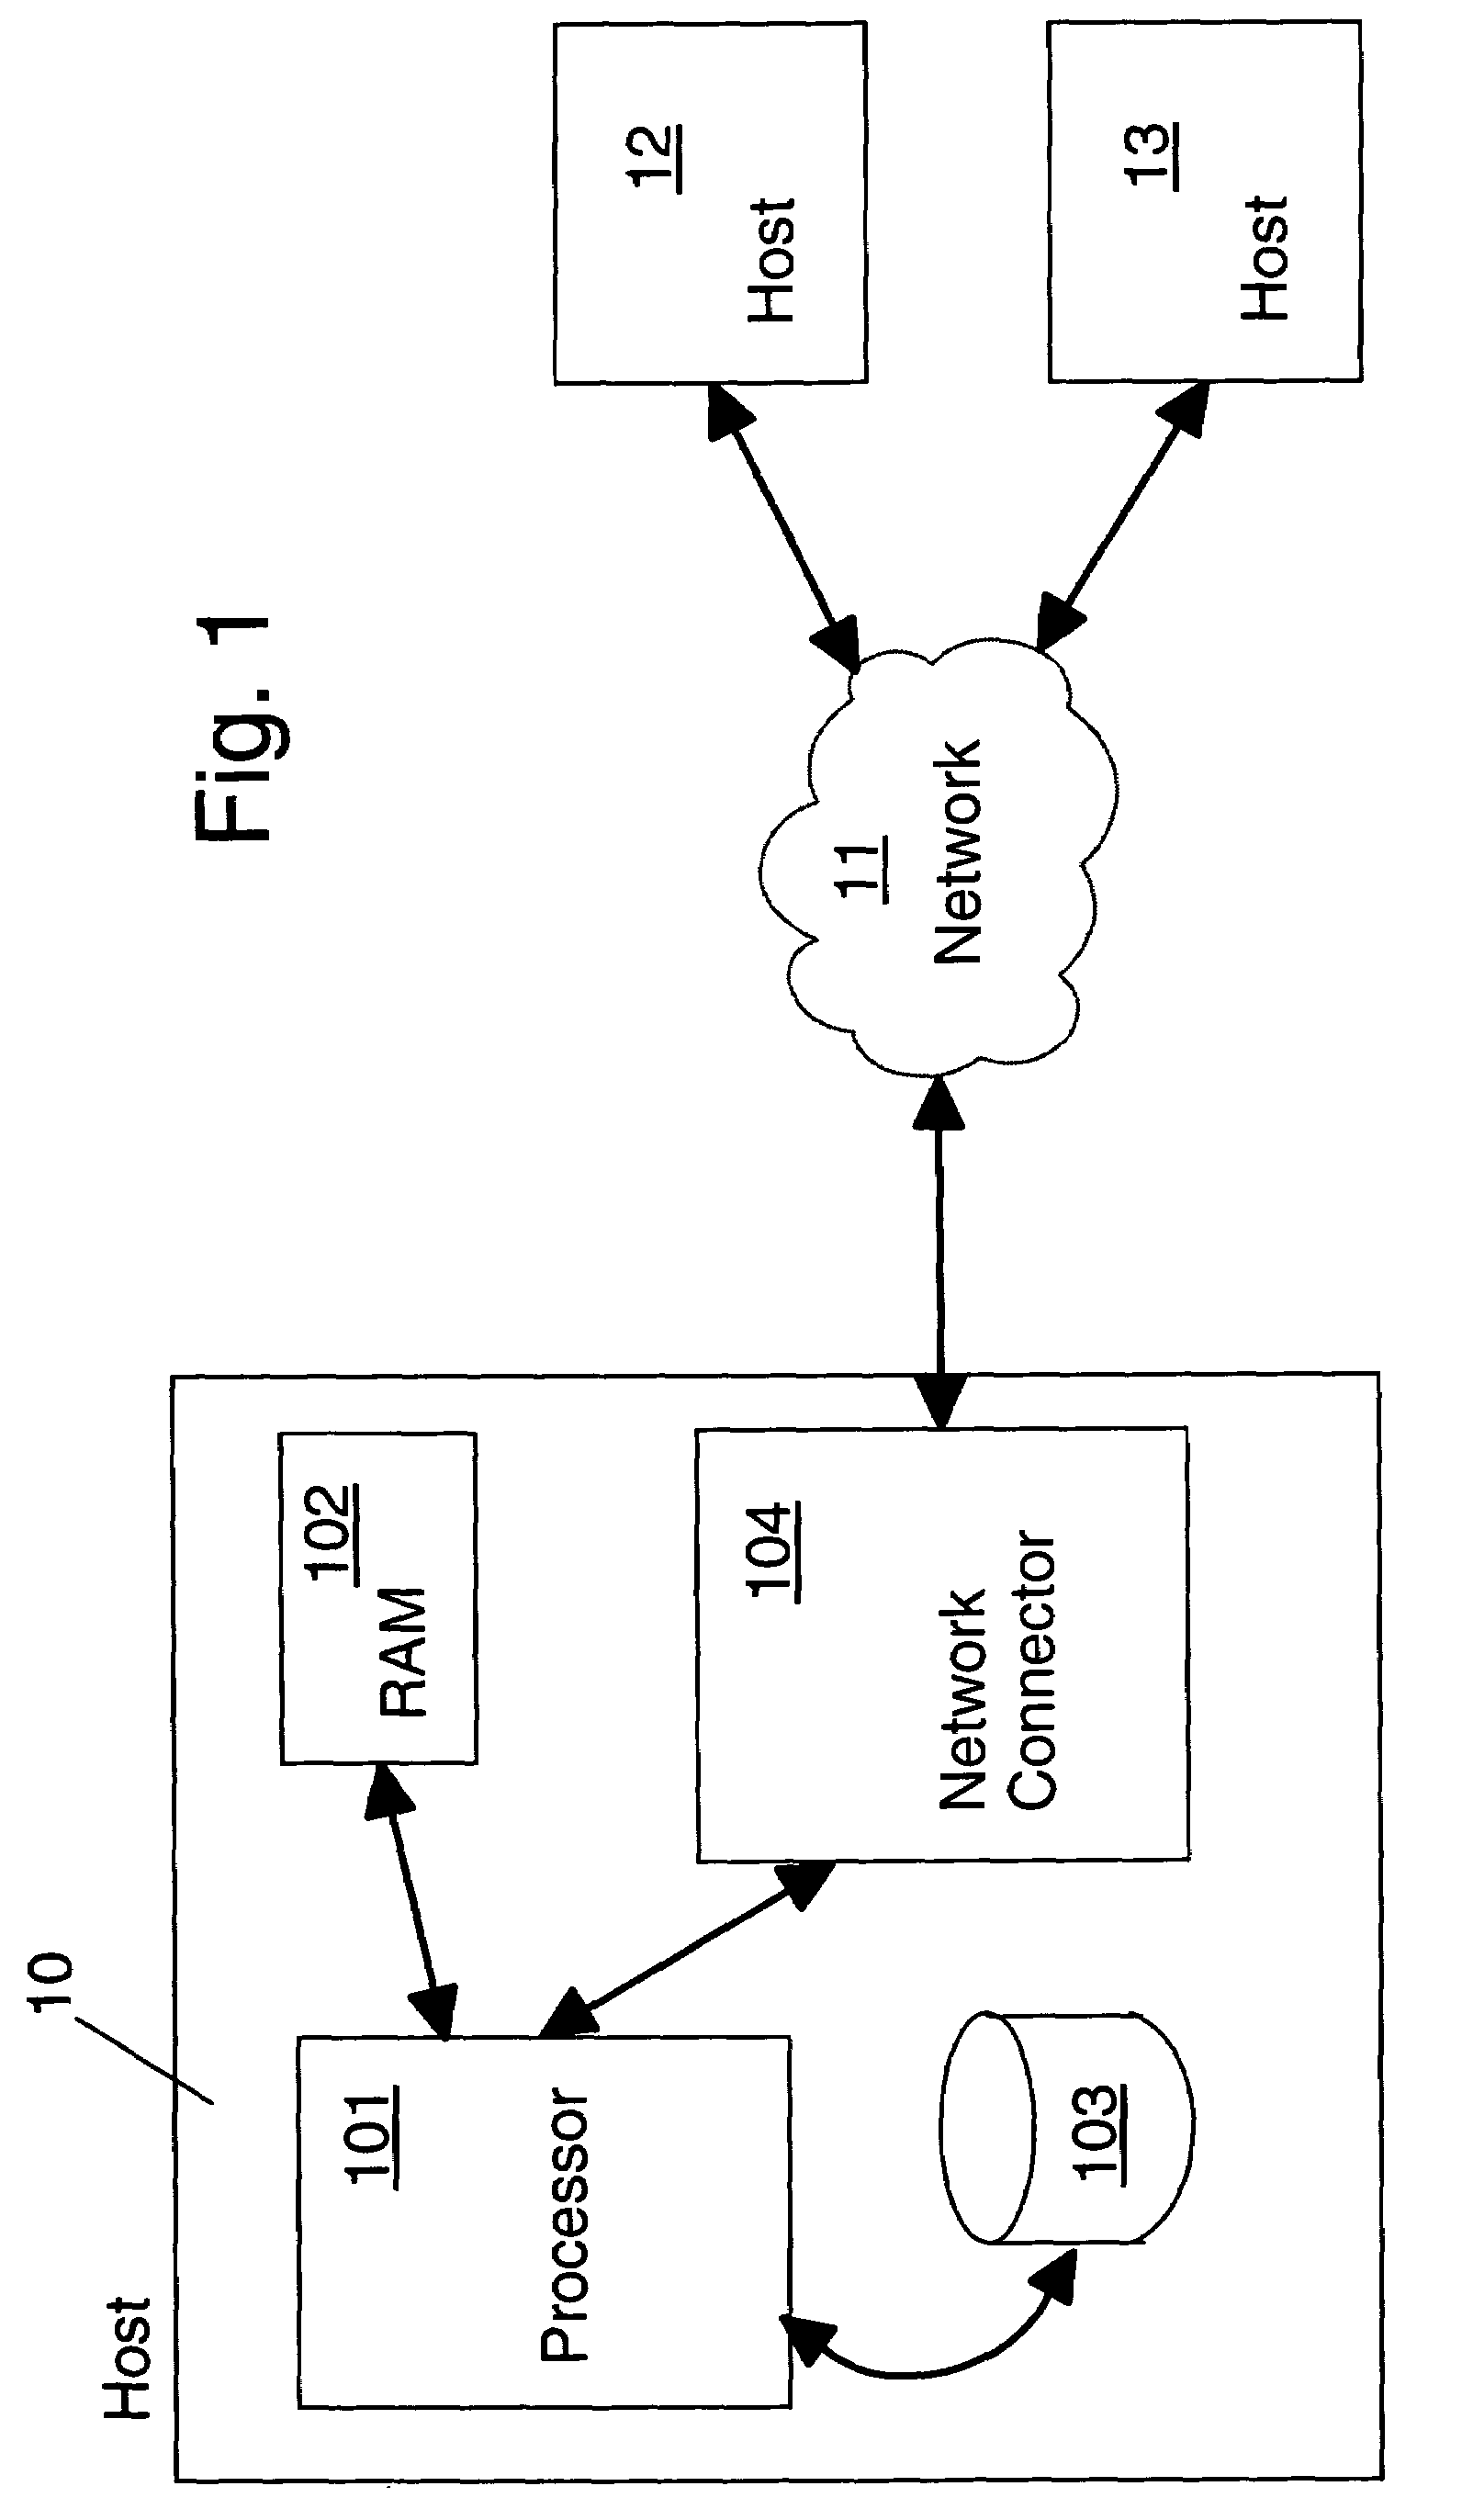 Managing transactions in a messaging system